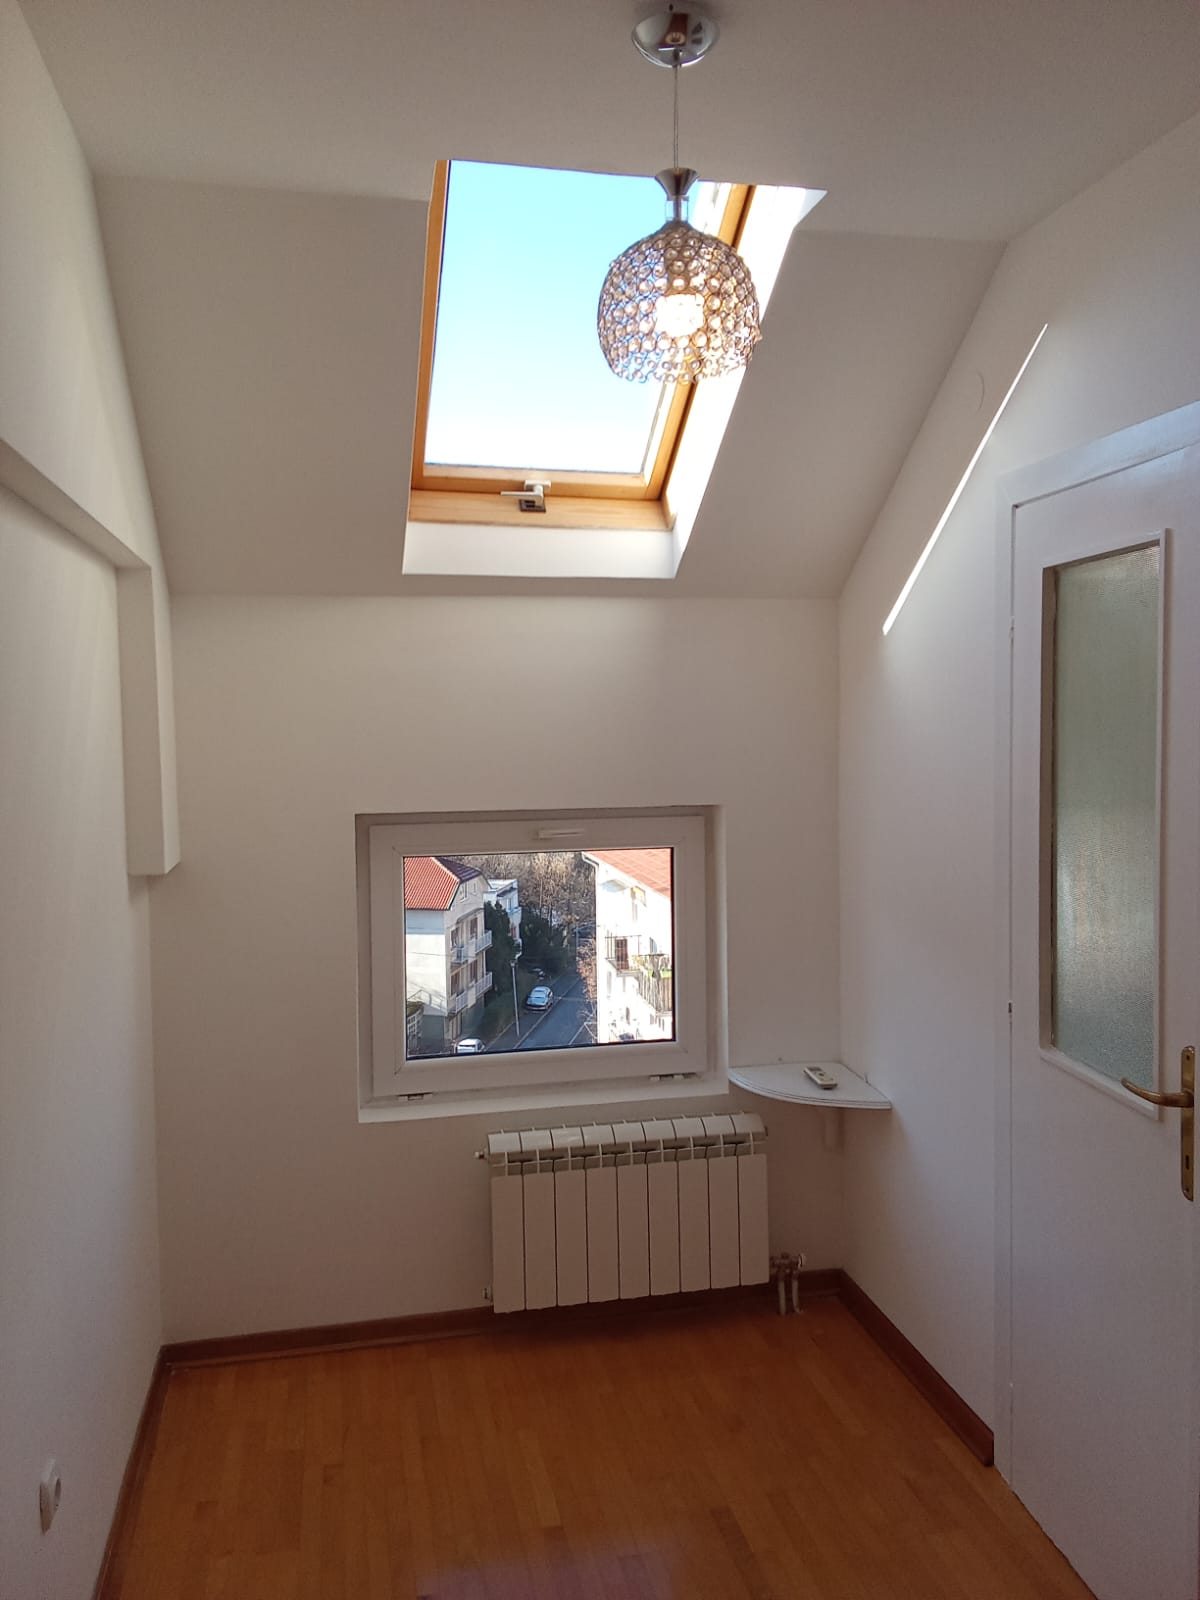 SALE tenanted flat buy-to-let apartment Beograd investment Serbia property estate Belgrade